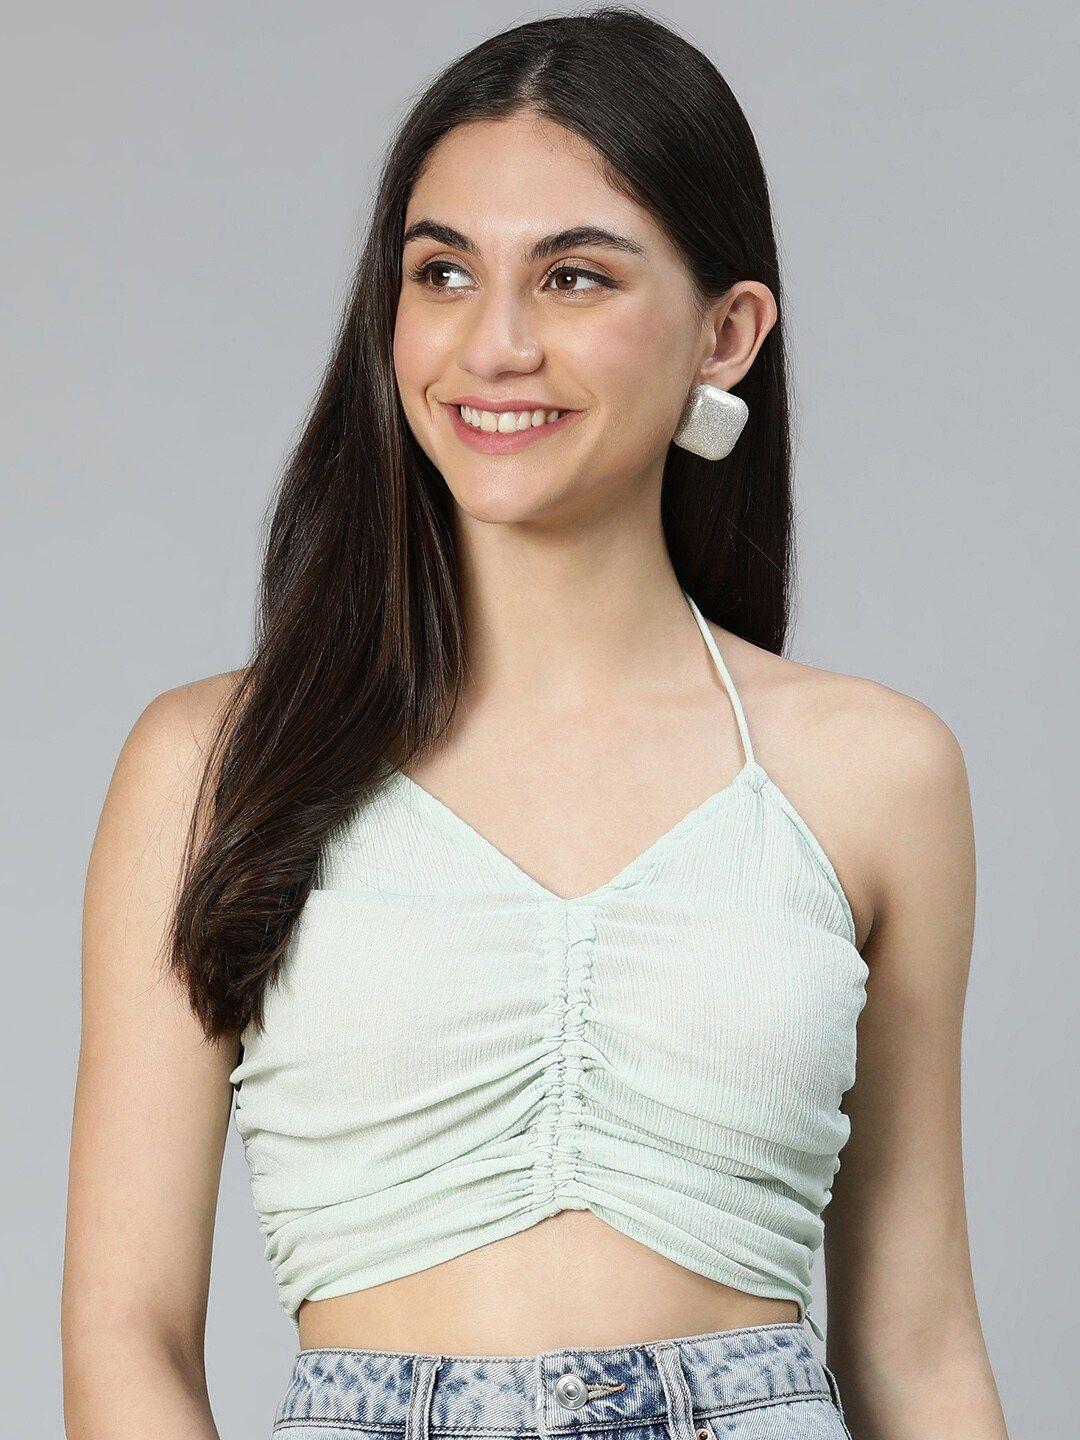 oxolloxo lime green bralette crop top